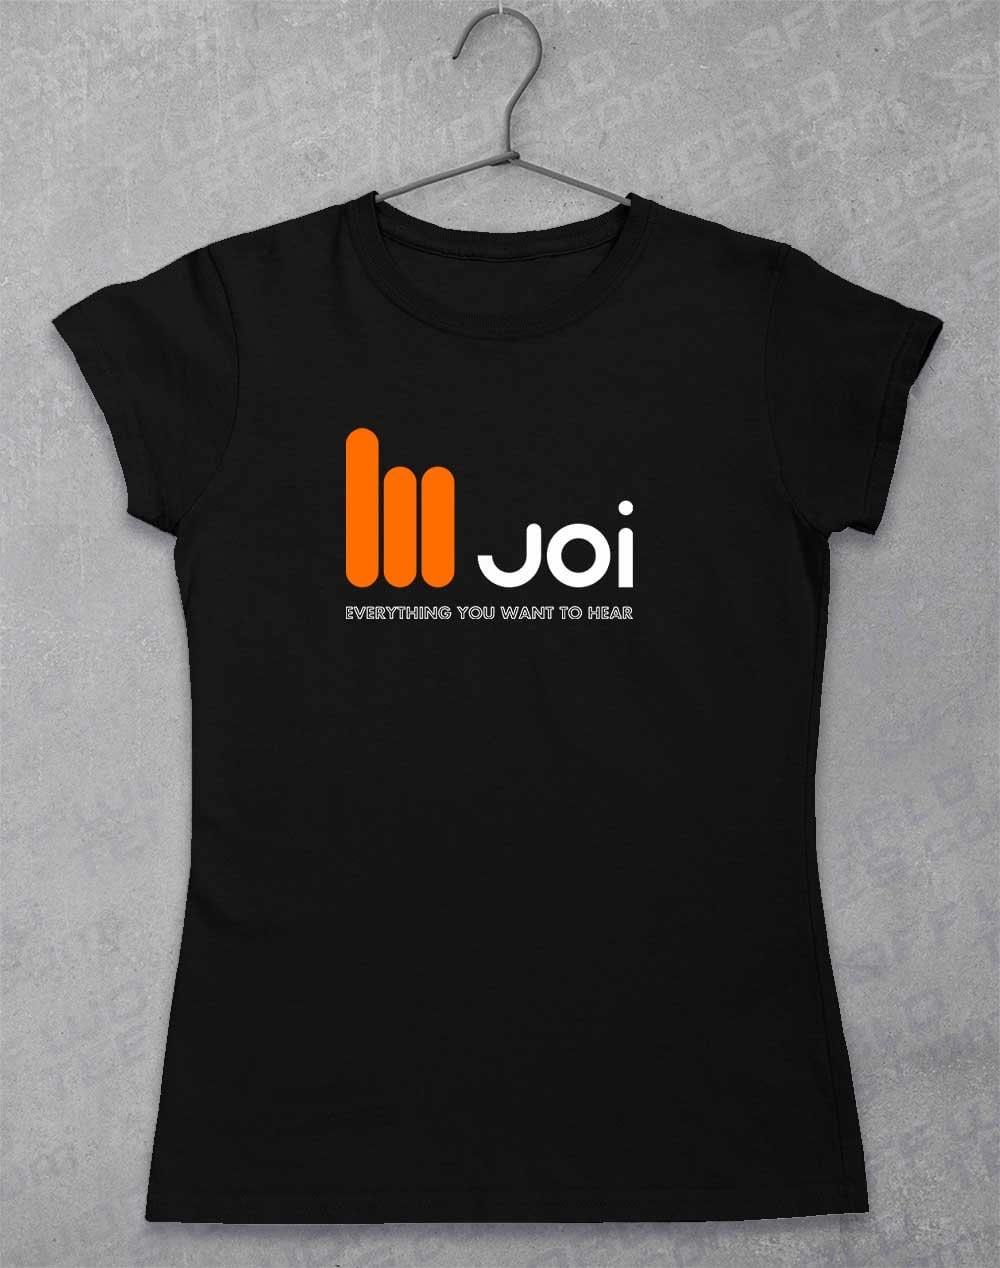 JOI Everything You Want to Hear Womens T-Shirt 8-10 / Black  - Off World Tees